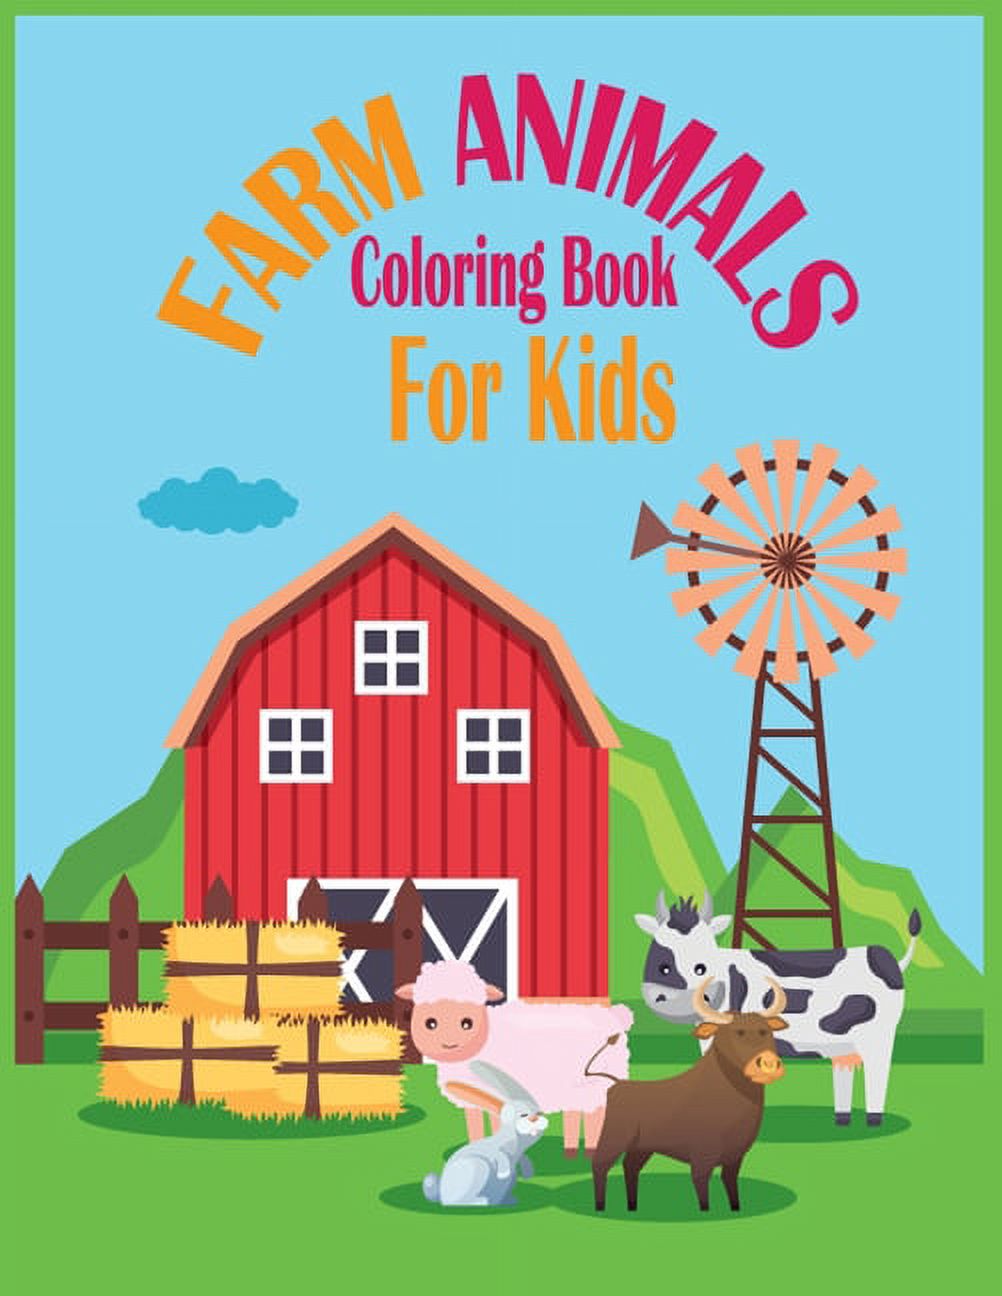 Farm Animals Coloring Book For Kids: Best Farm Animal Coloring Book For Kids/Toddler Ages 4-8 30 Pages Simple and Fun Designs Cute Cows, Dogs, Horses, Goats, Ducks, Chicken and more! (Paperback) - image 1 of 1